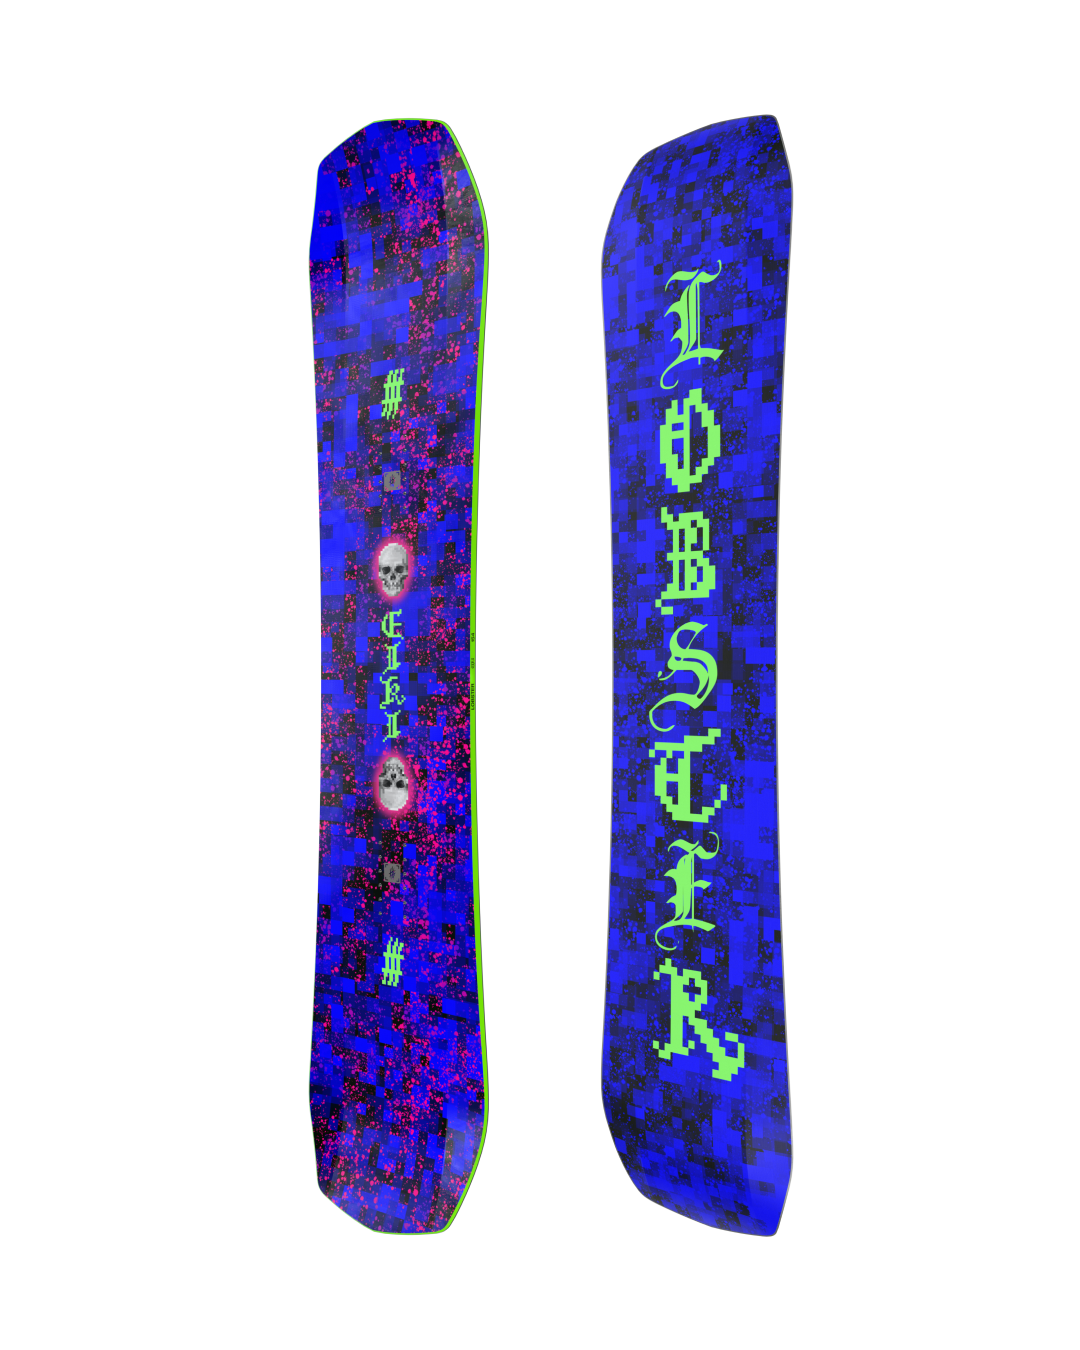 Eiki Pro Lobster snowboards 2023-2024 snowboards product image